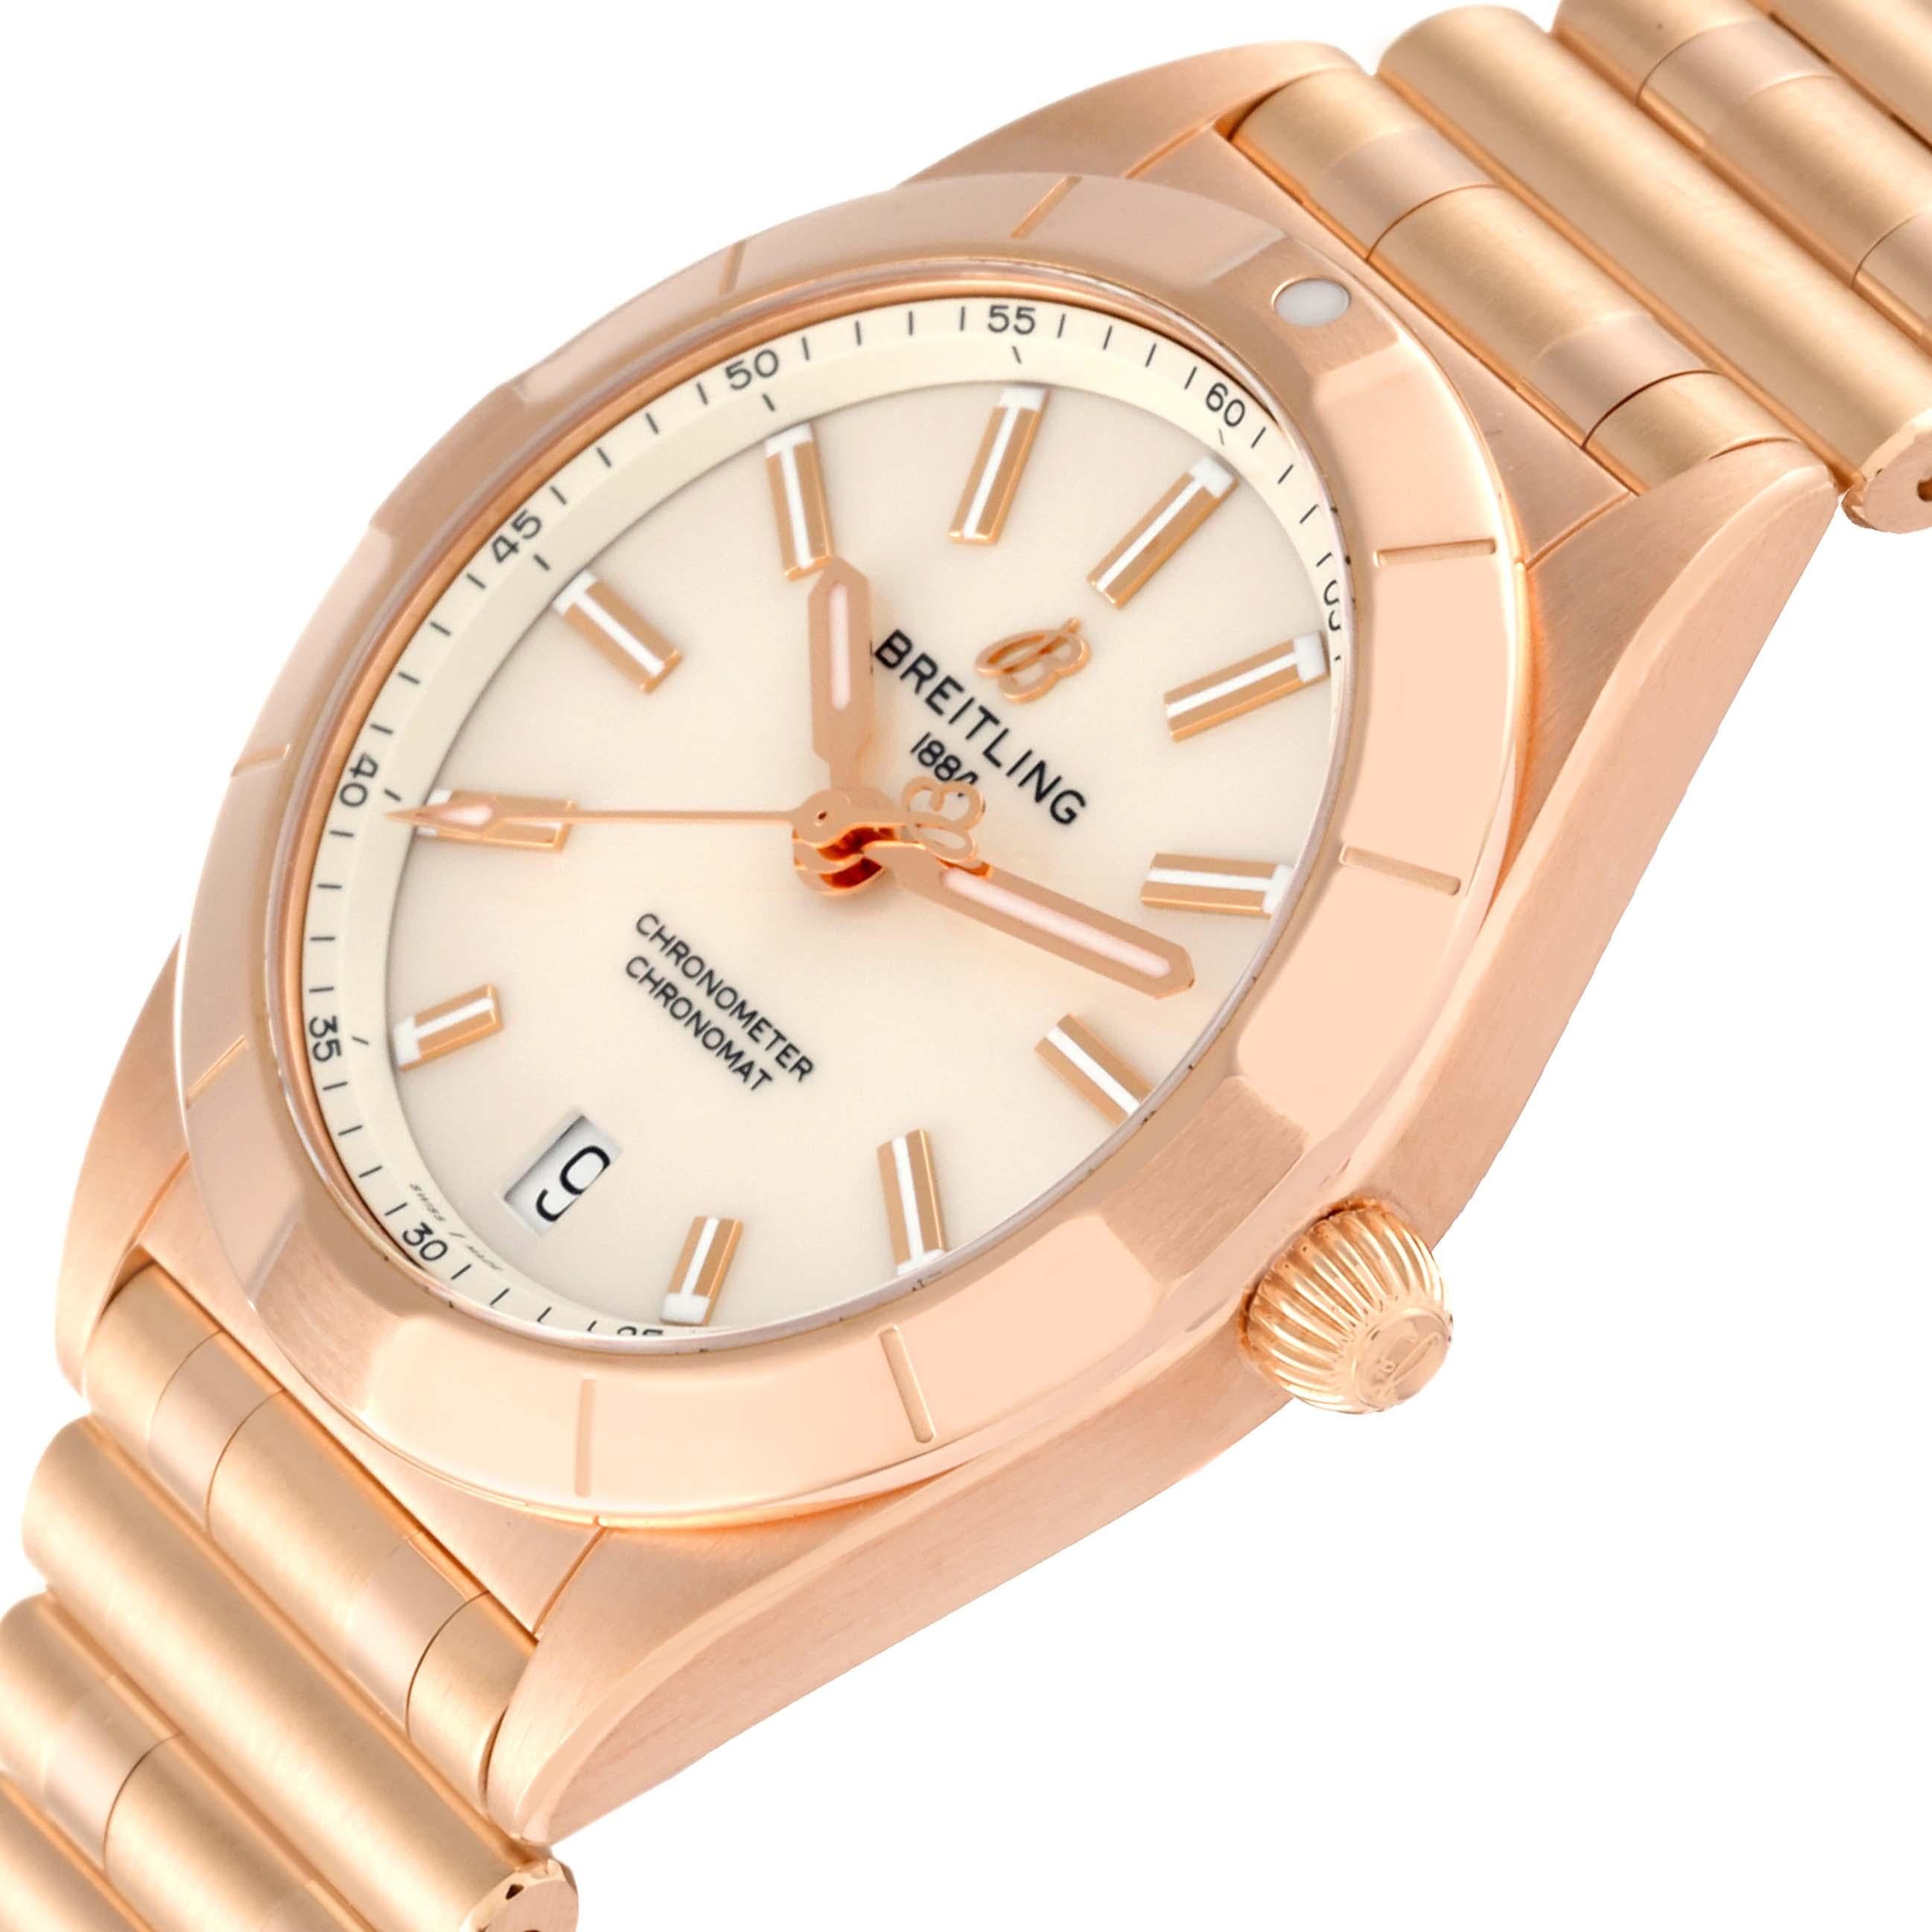 Breitling Chronomat 32 White Dial Rose Gold Ladies Watch R77310. SuperQuartz? thermocompensated quartz electronic movement with an EOL indicator. 18k rose gold case 32.0 mm in diameter. 18k rose gold fixed bezel. Four 15 minute markers. Scratch